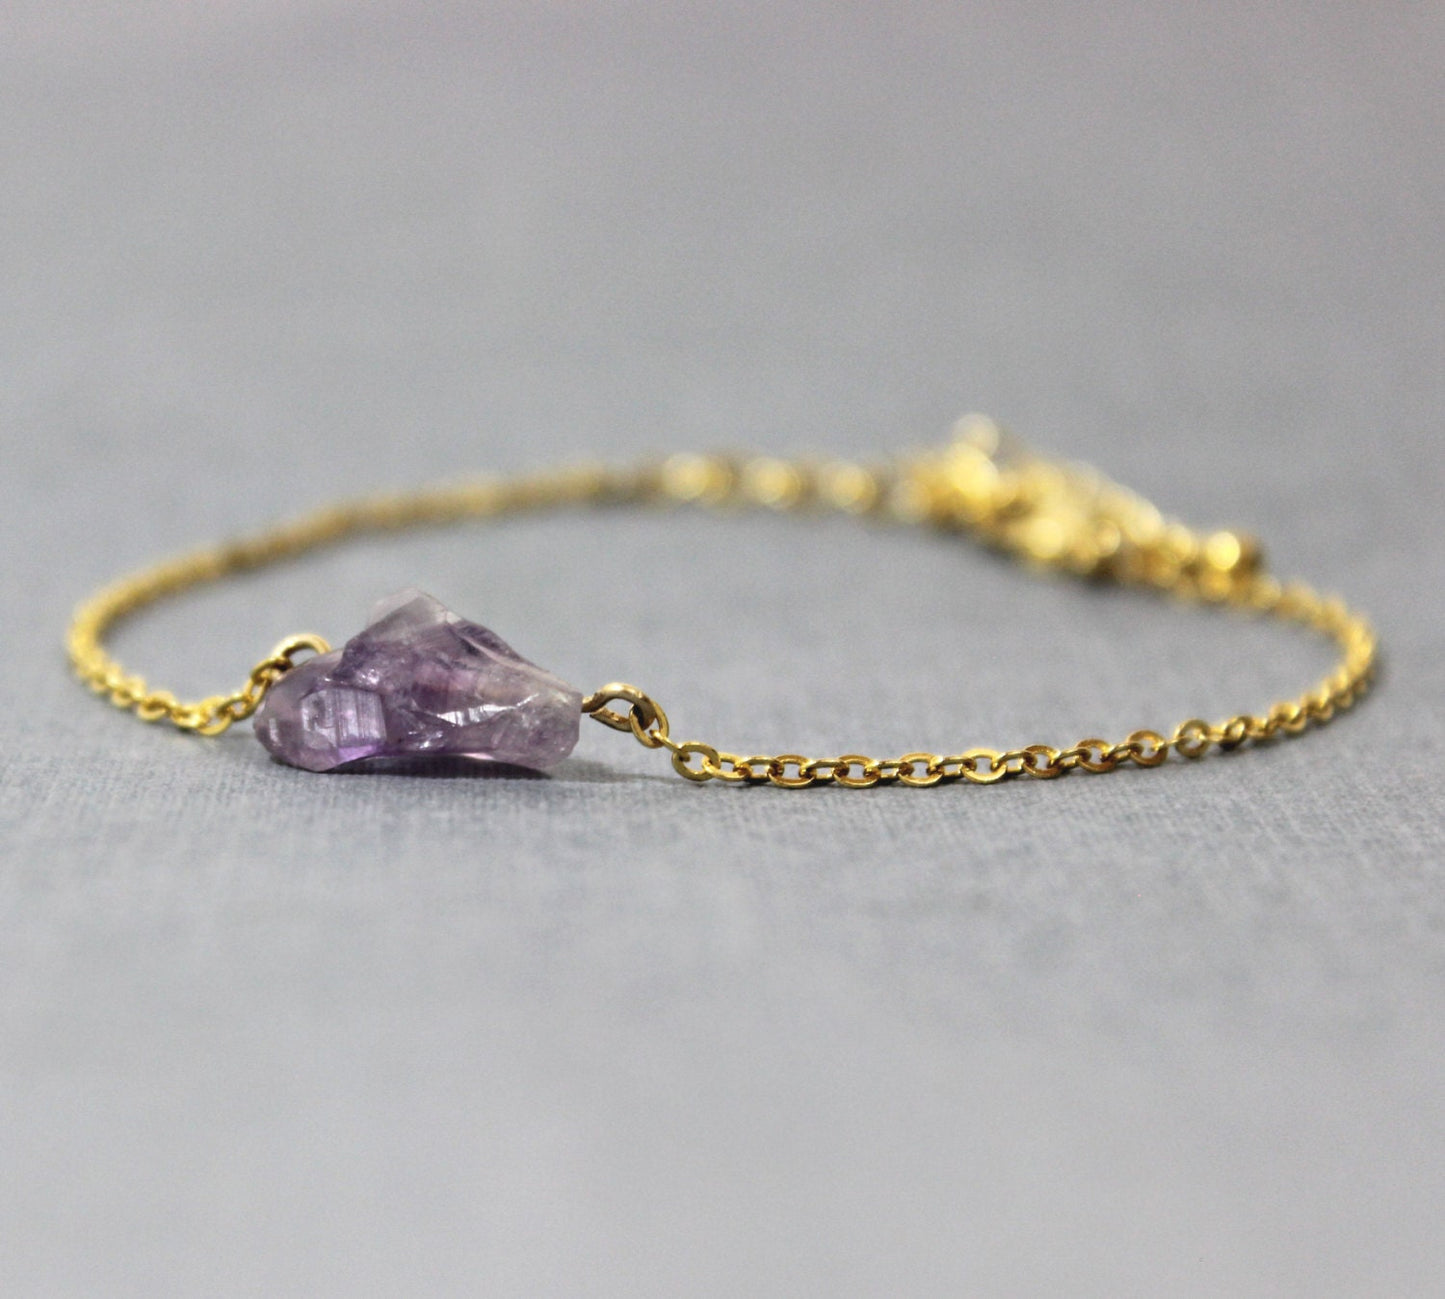 Raw Amethyst and Gold Bracelet - February Birthstone Bracelet -Amethyst Bracelet